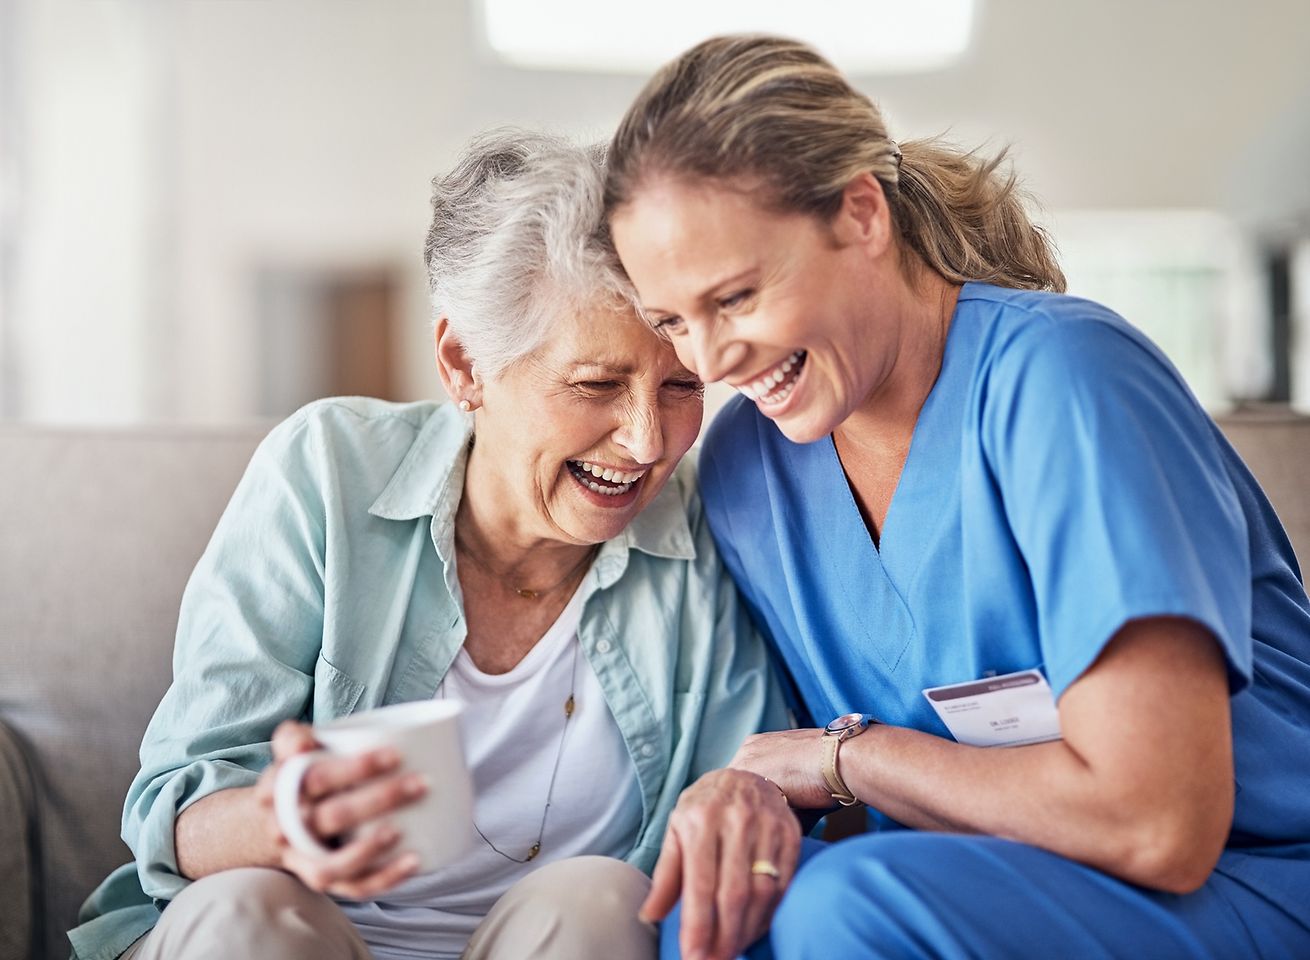 
Smart Adult Care is freeing staff to focus on high quality care work as around eight hours of incontinence management time was saved per resident per month in the trail period.